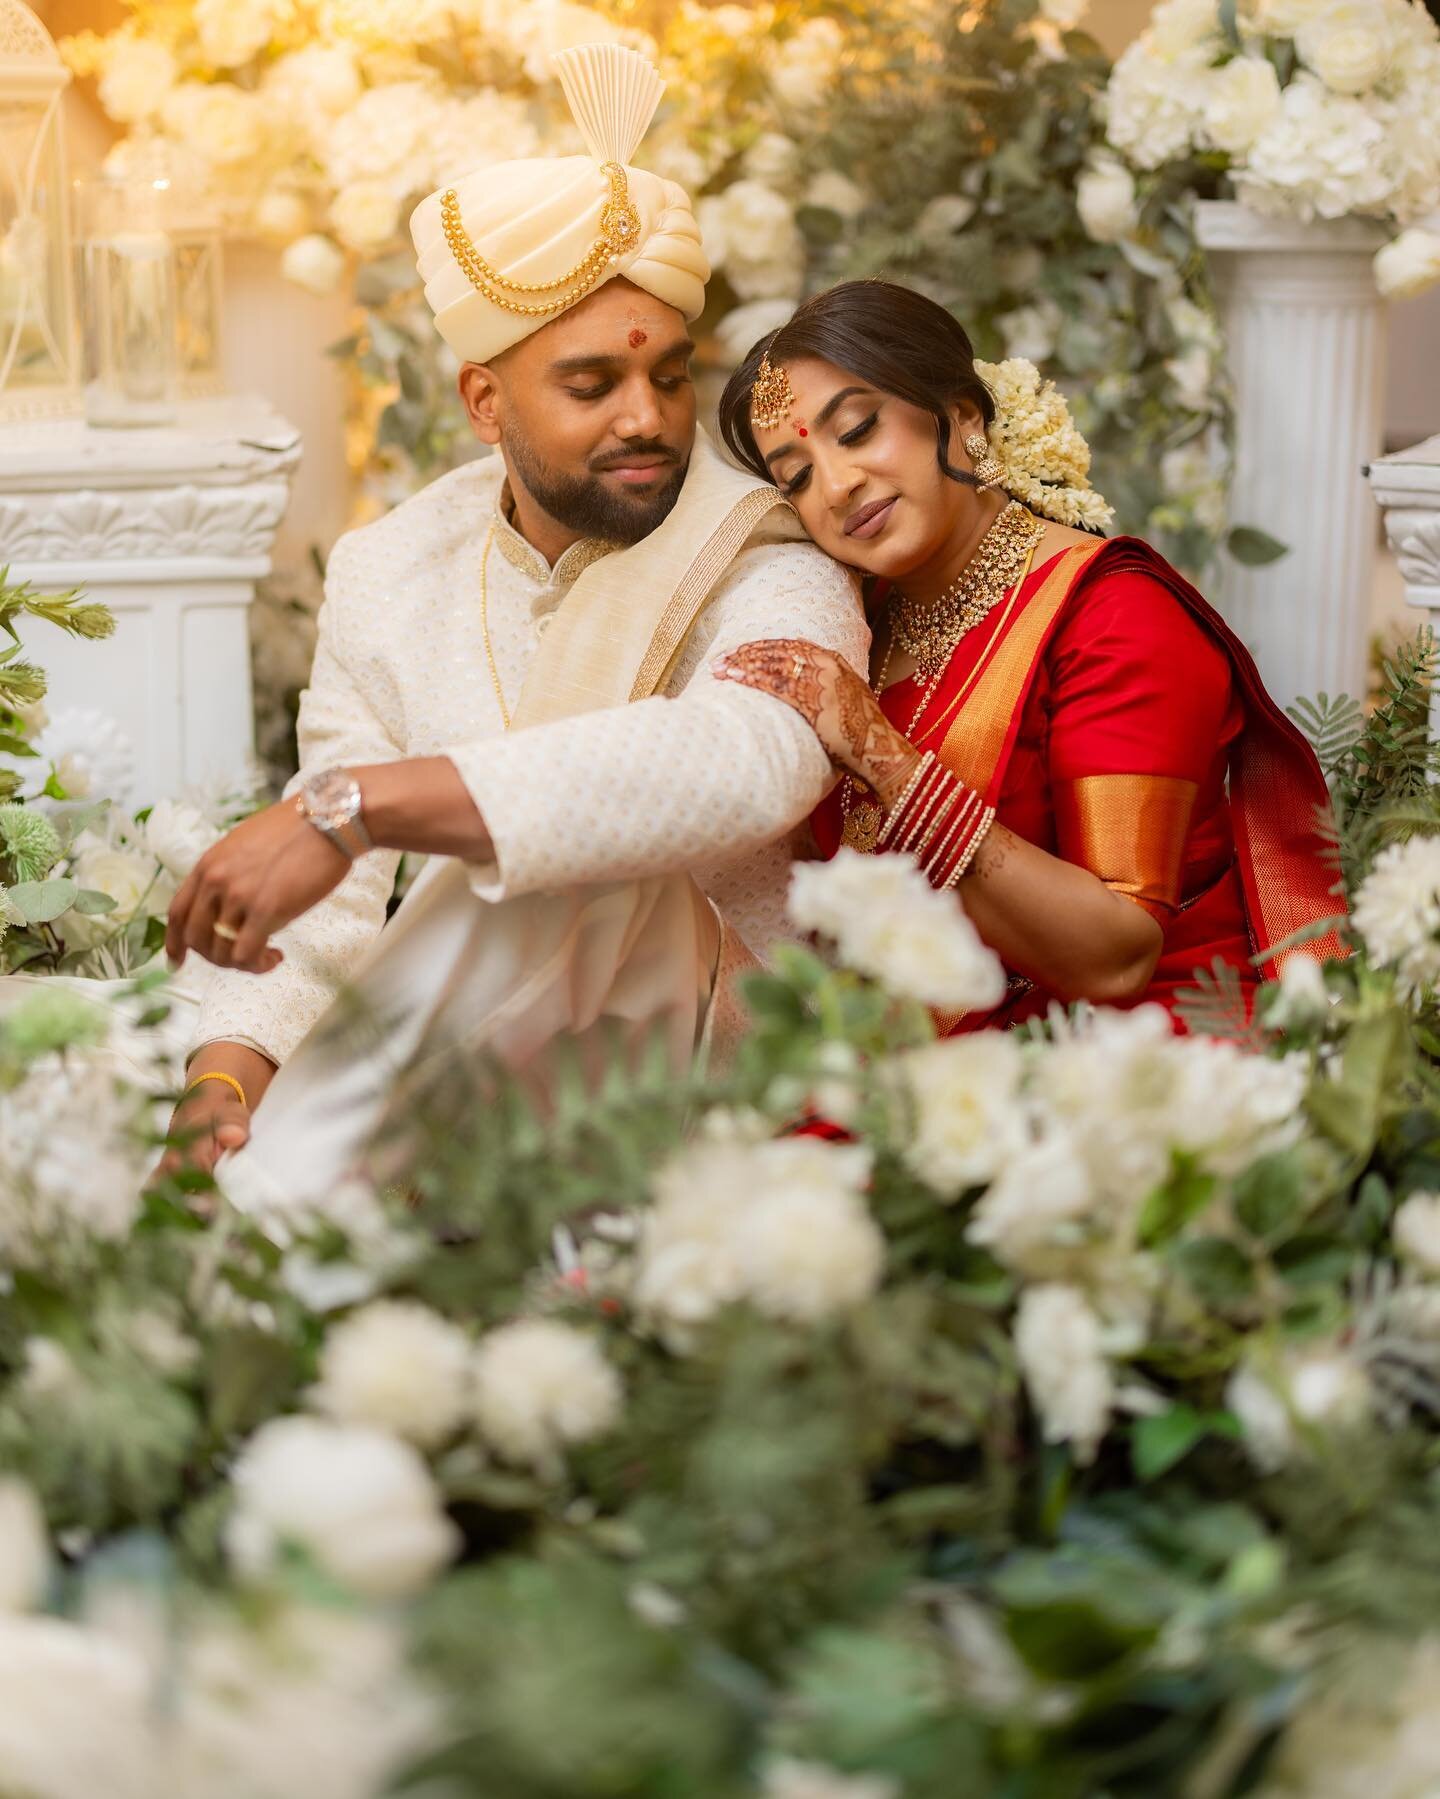 Dinesh &amp; Shamitra just got married!
&bull;
Email info@memoriesmedia.ca for all your Inquiries.
&bull;
#hinduwedding #weddingphotographer #justmarried#tamilwedding